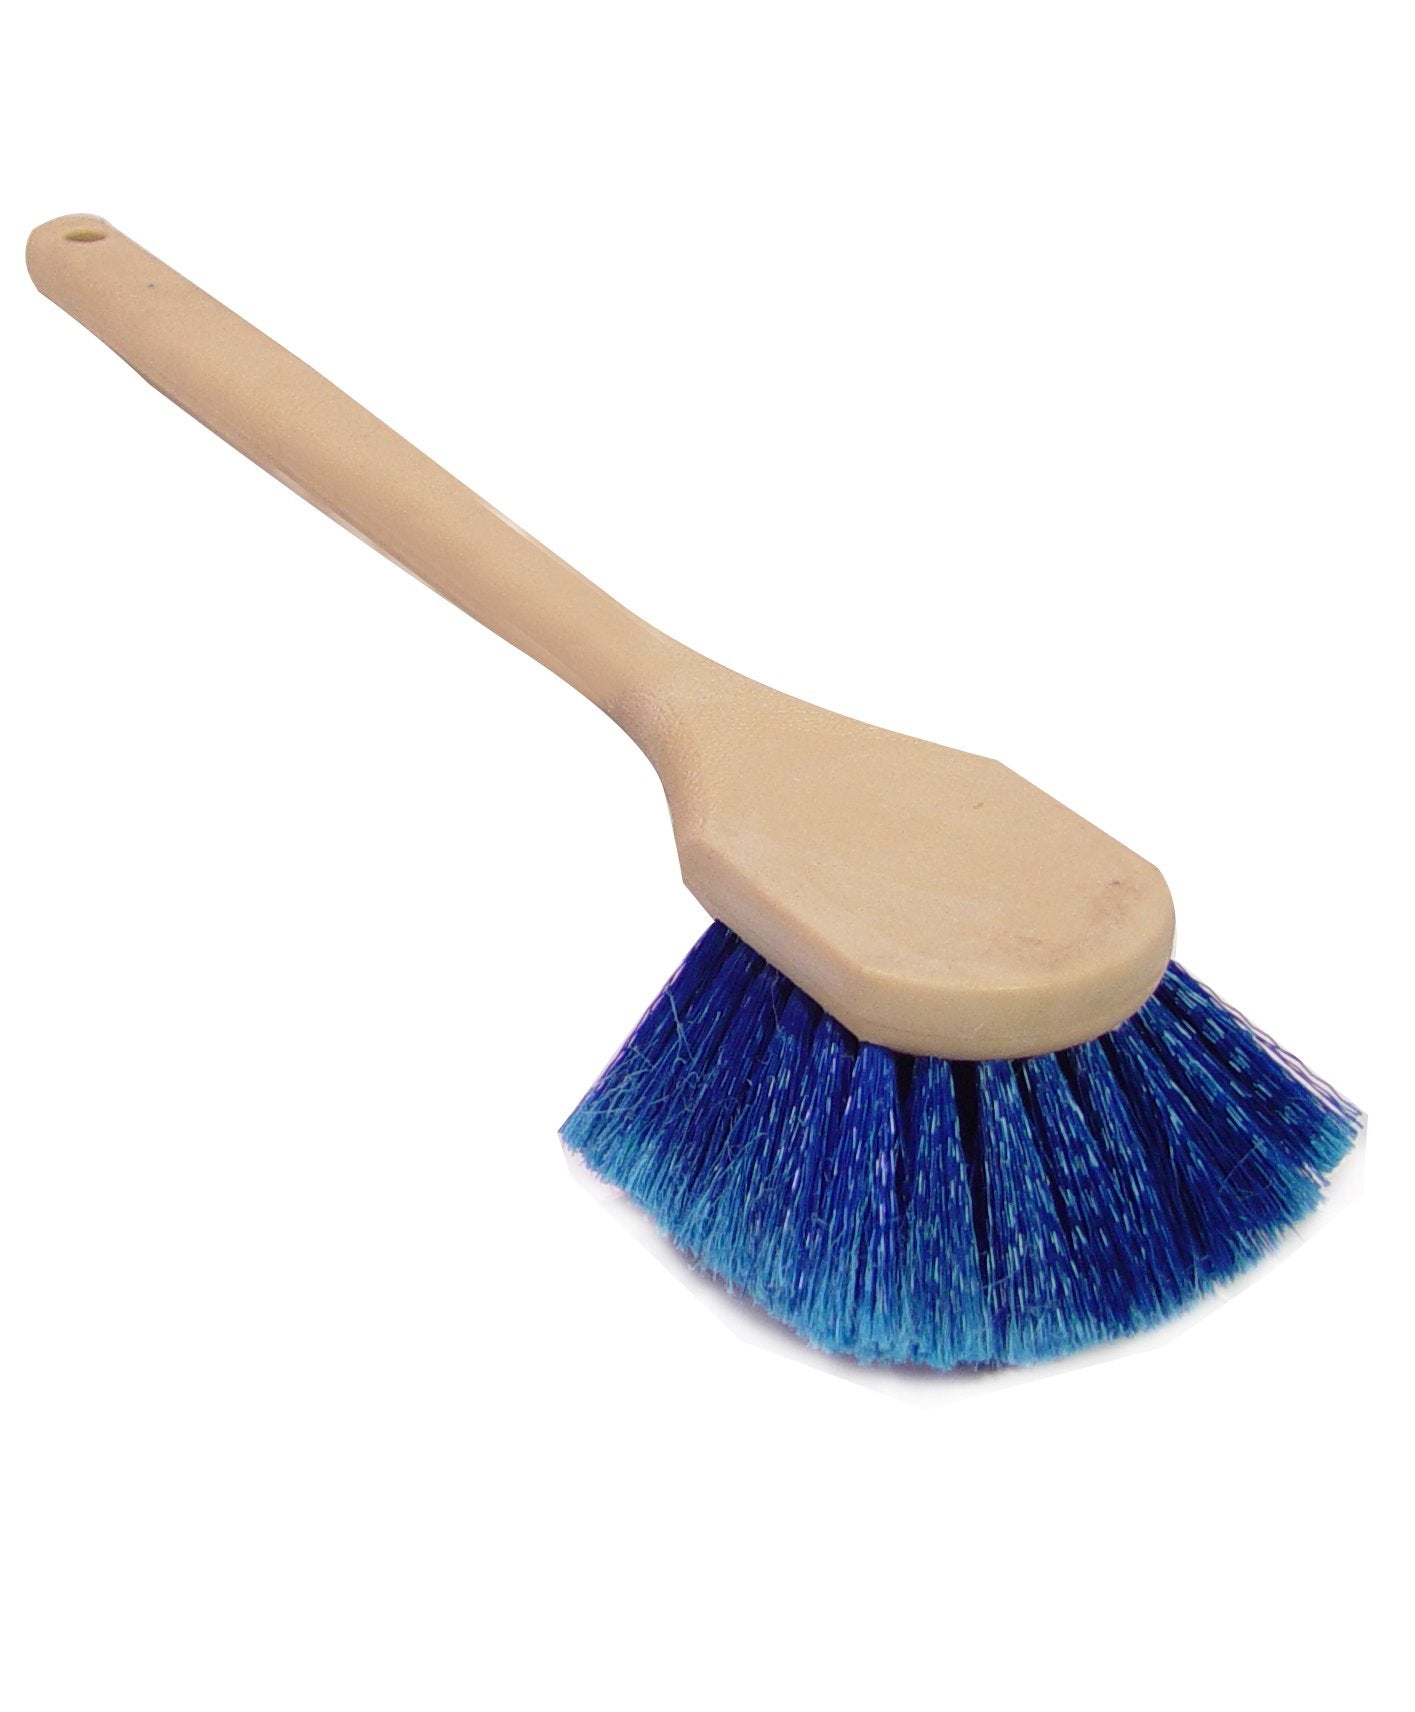 Bon 84-668 Wire Brush - 7 1/8-In. x 2 1/4-In. with Wood Handle